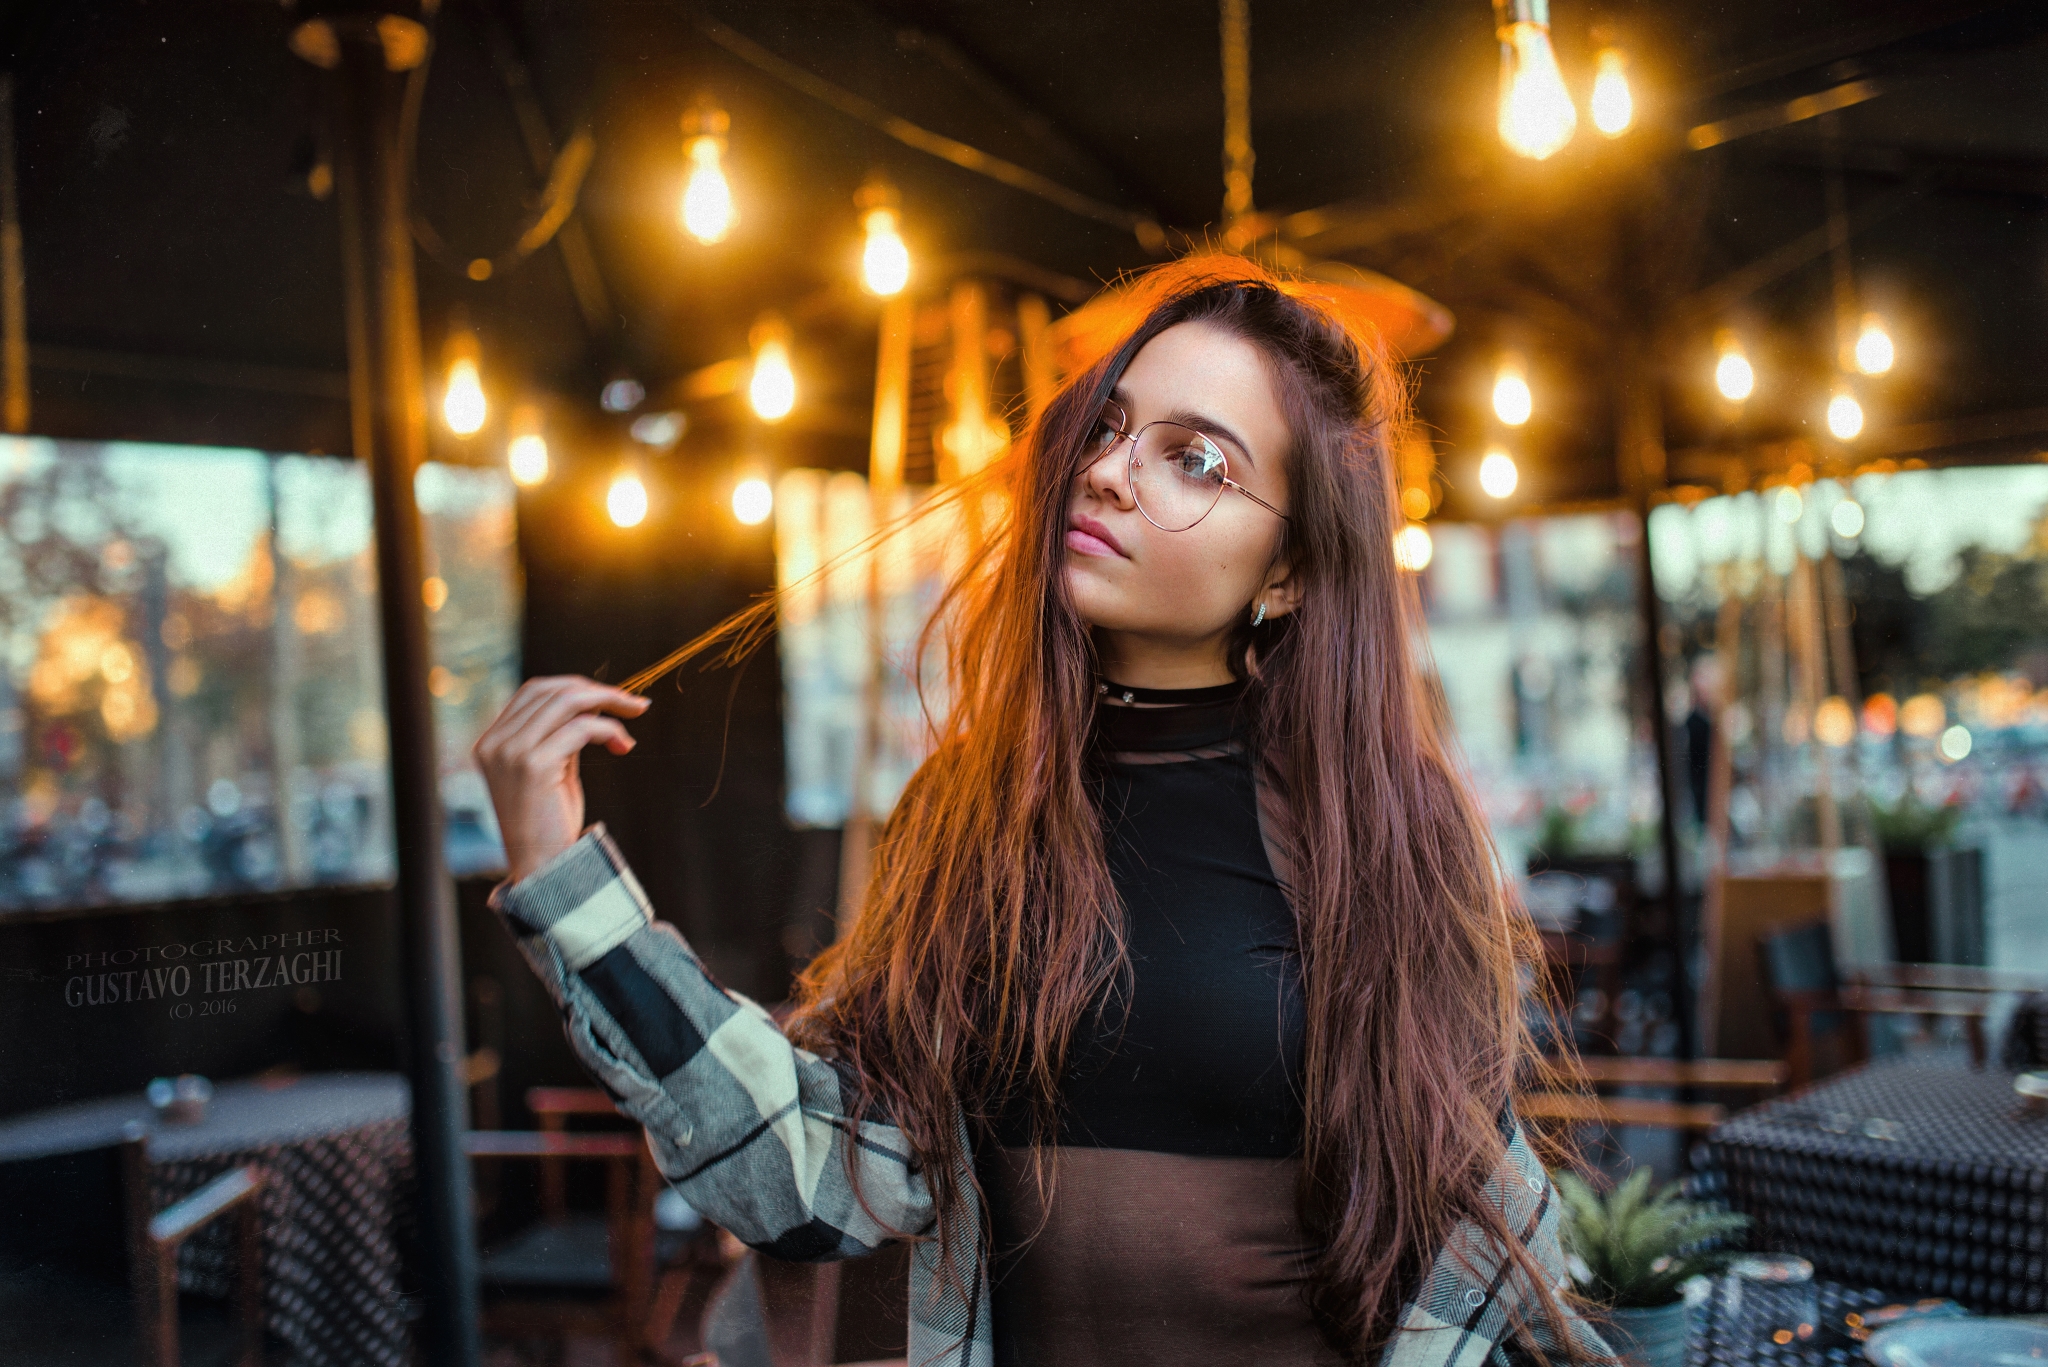 People 2048x1367 women model brunette long hair touching hair women with glasses looking away necklace black top plaid shirt depth of field restaurant light bulb indoors women indoors portrait photography Gustavo Terzaghi